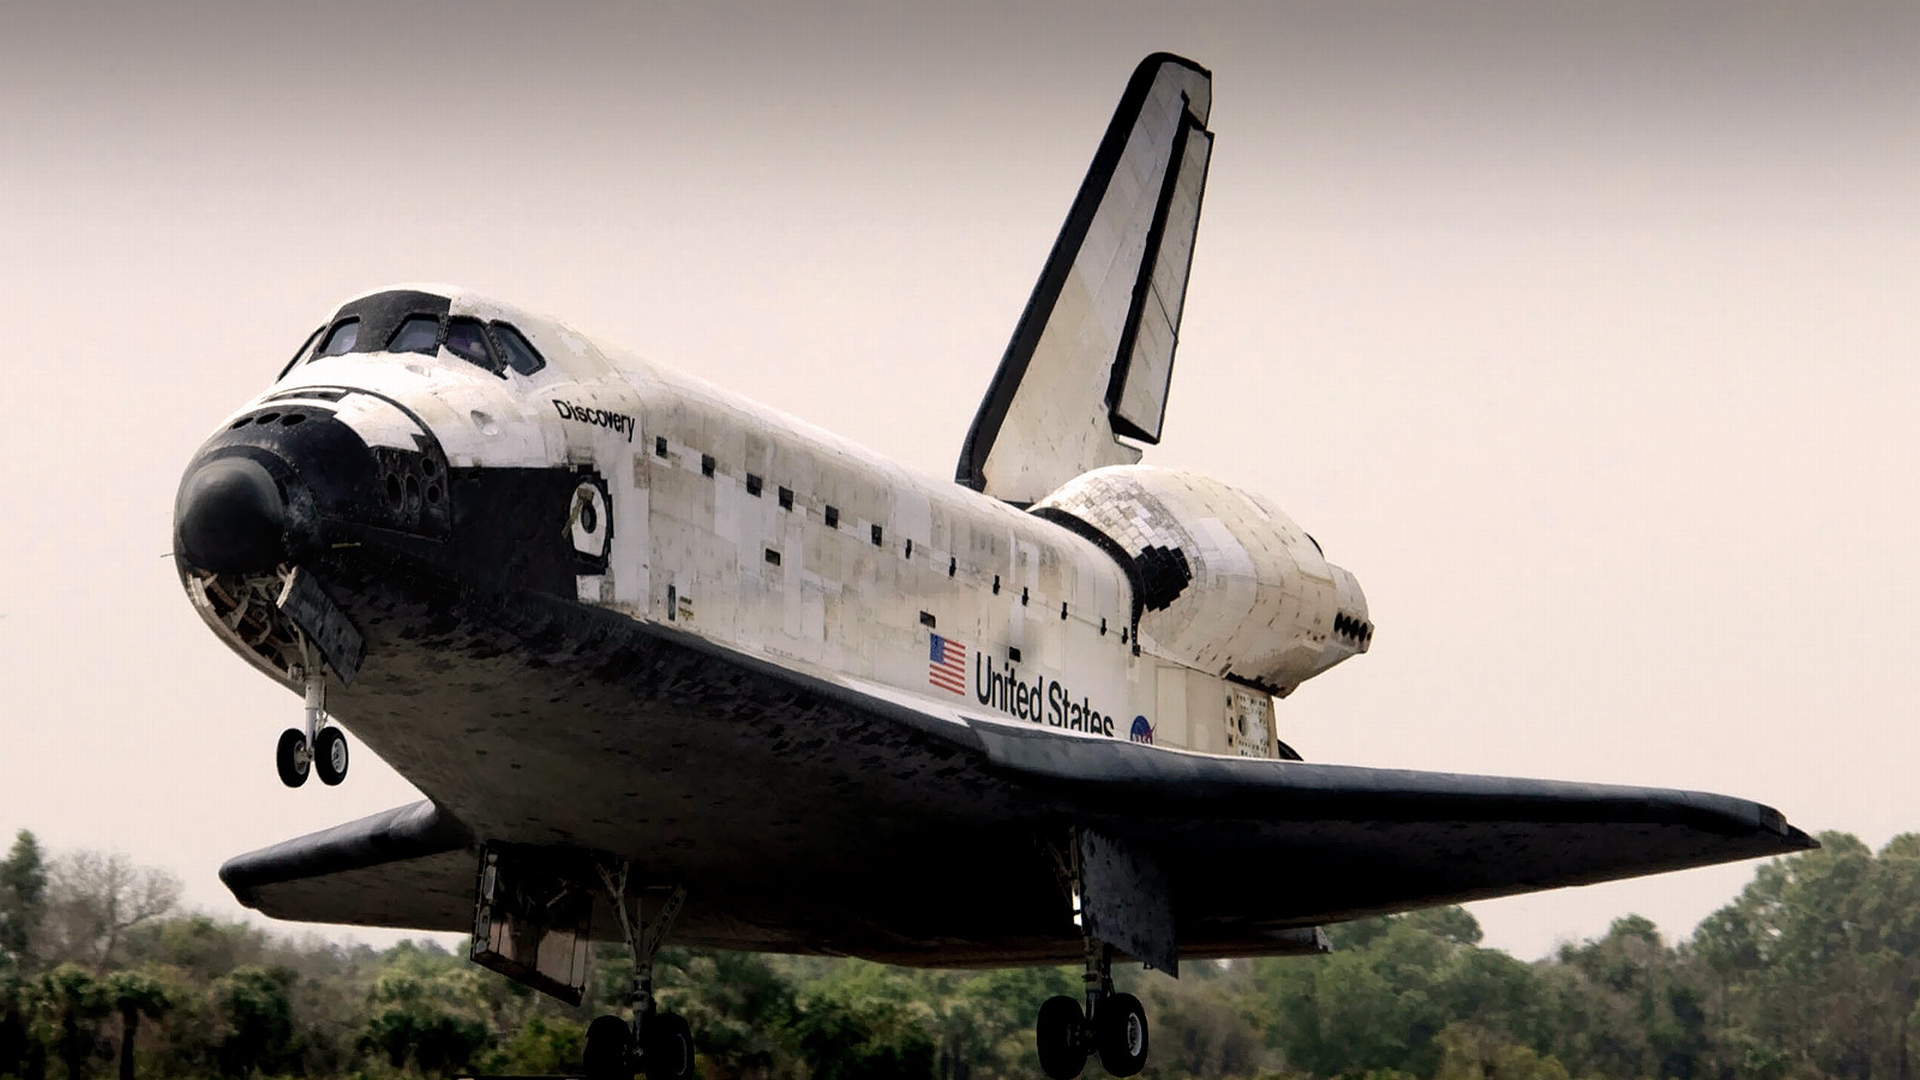 vehicles, space shuttle discovery, space shuttles